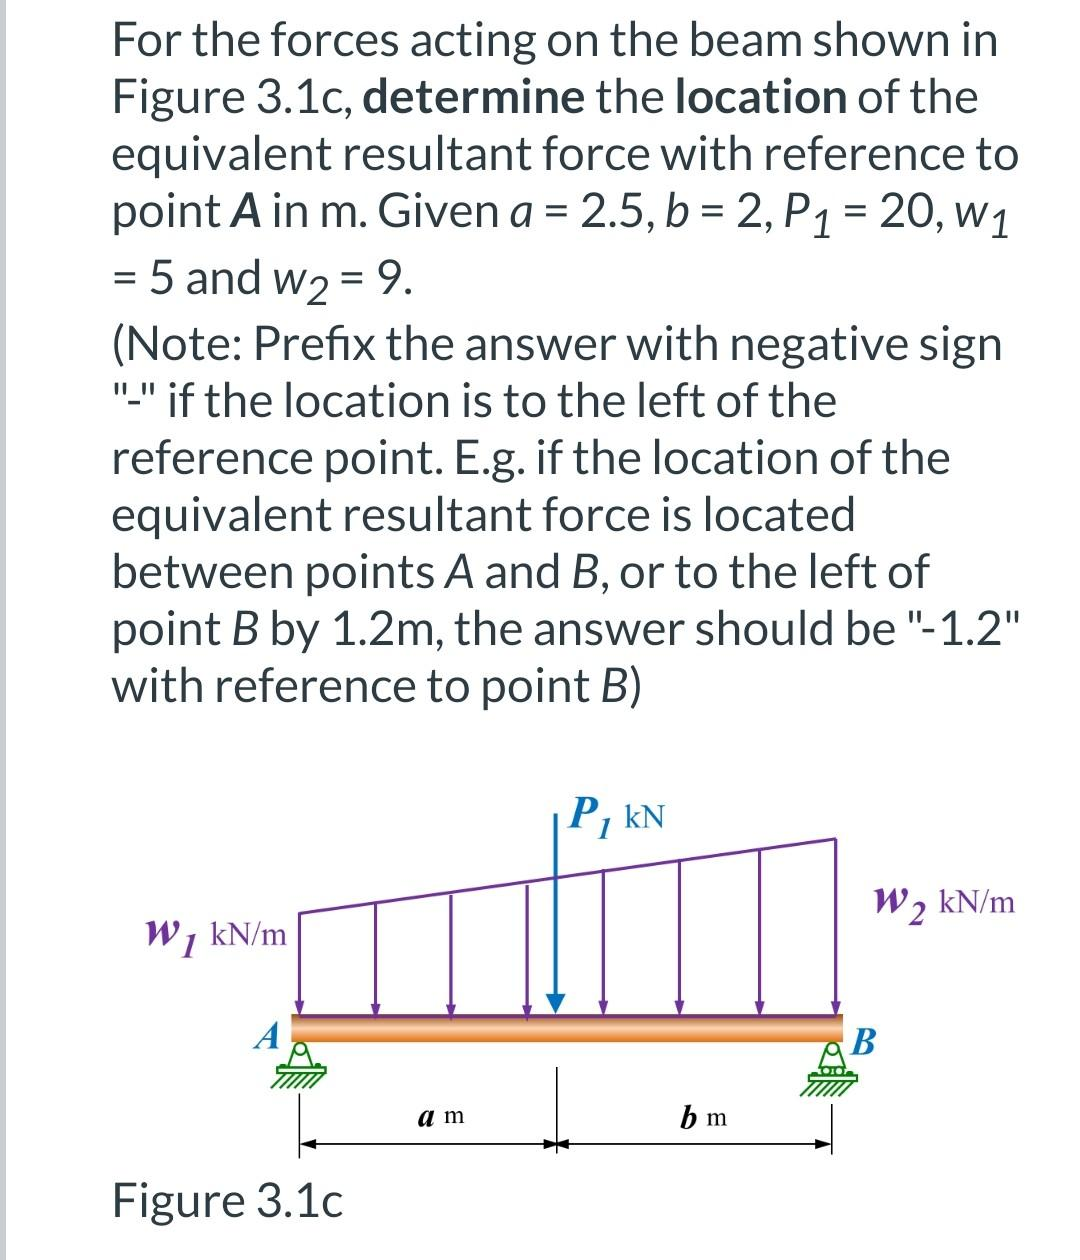 For the forces acting on the beam shown in
Figure 3.1c, determine the location of the
equivalent resultant force with reference to
point A in m. Given a = 2.5, b = 2, P1 = 20, w1
%3D
= 5 and w2 = 9.
(Note: Prefix the answer with negative sign
"." if the location is to the left of the
reference point. E.g. if the location of the
equivalent resultant force is located
between points A and B, or to the left of
point B by 1.2m, the answer should be "-1.2"
with reference to point B)
P, kN
W2 kN/m
W, kN/m
A
a m
b m
Figure 3.1c
